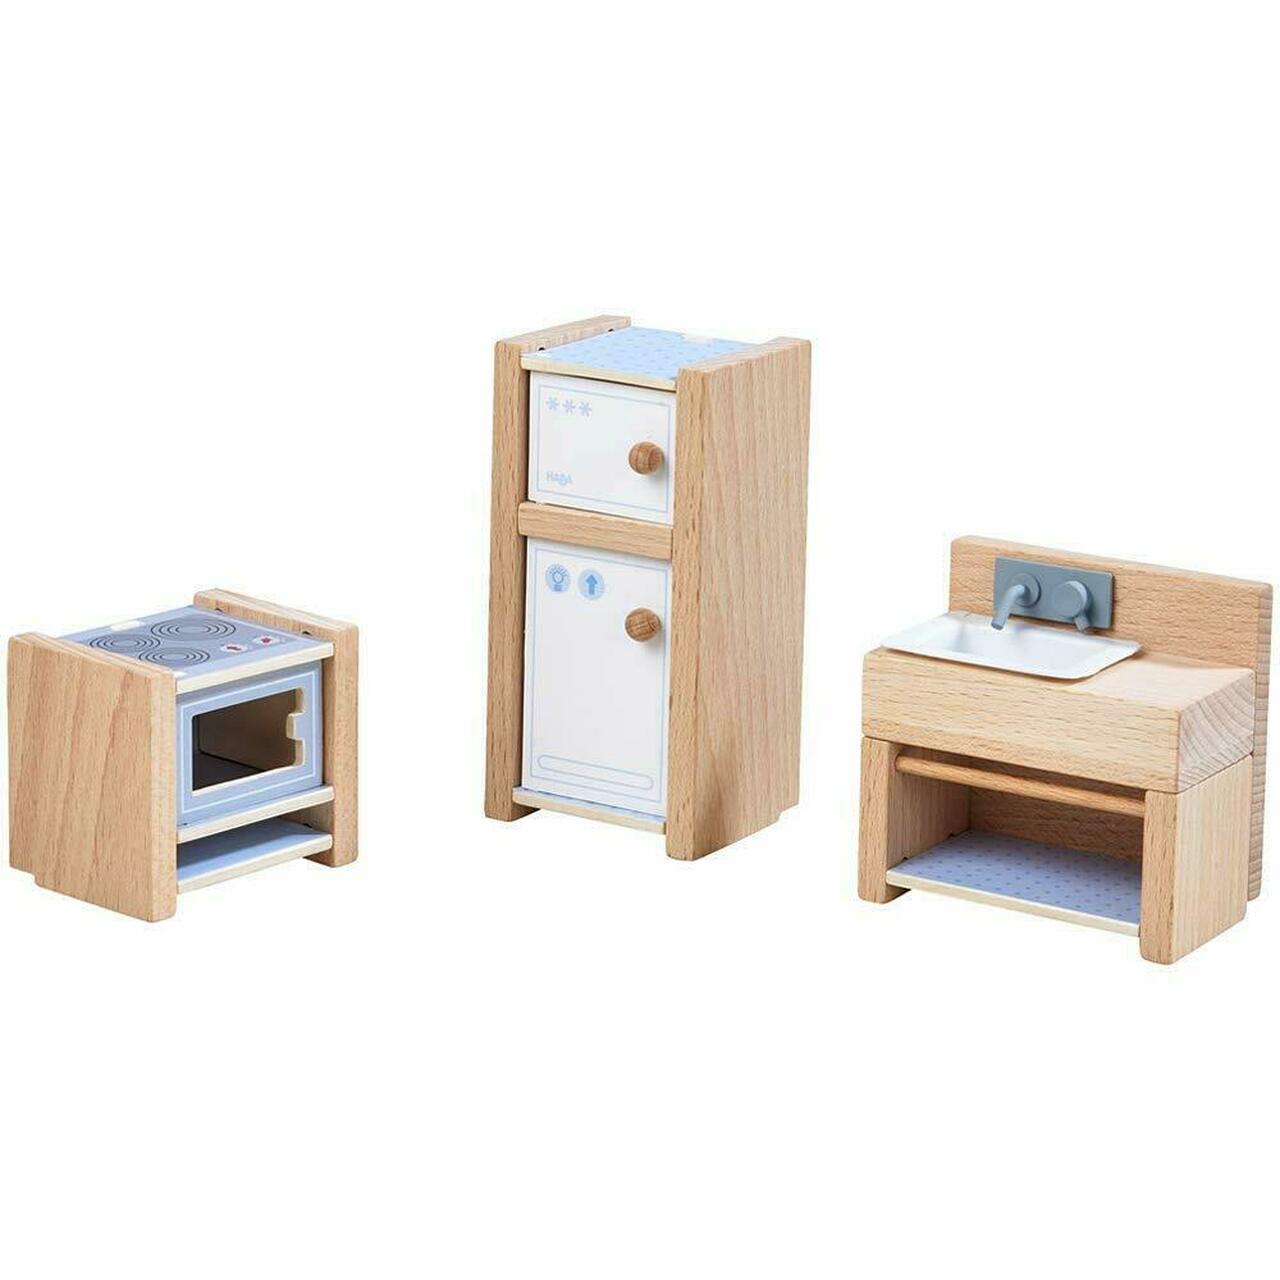 HABA Little Friends Kitchen - Miniature Play House Furniture - Wood Wood Toys Canada's Favourite Montessori Toy Store